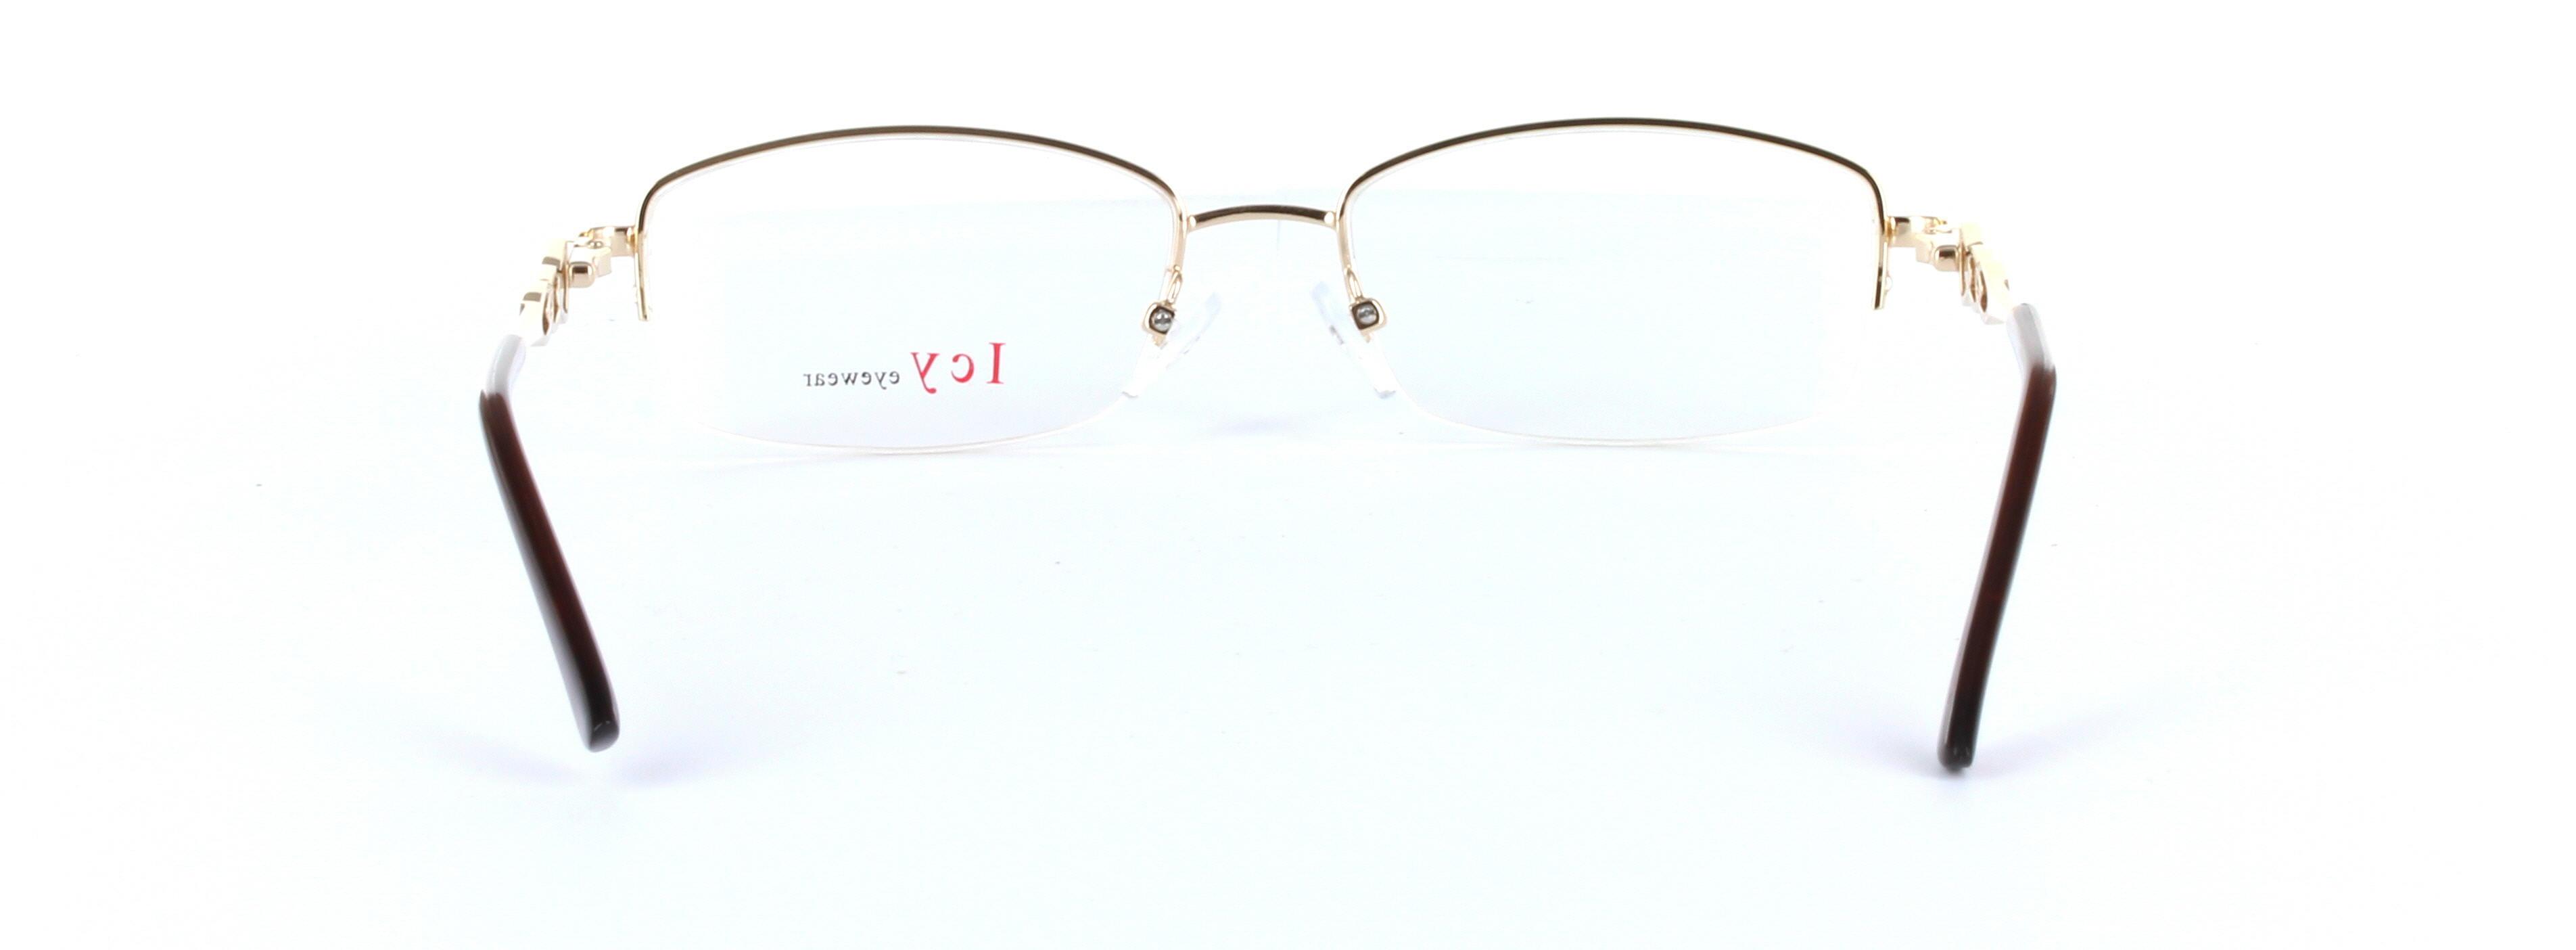 Maisie Gold Semi Rimless Oval Metal Glasses - Image View 3